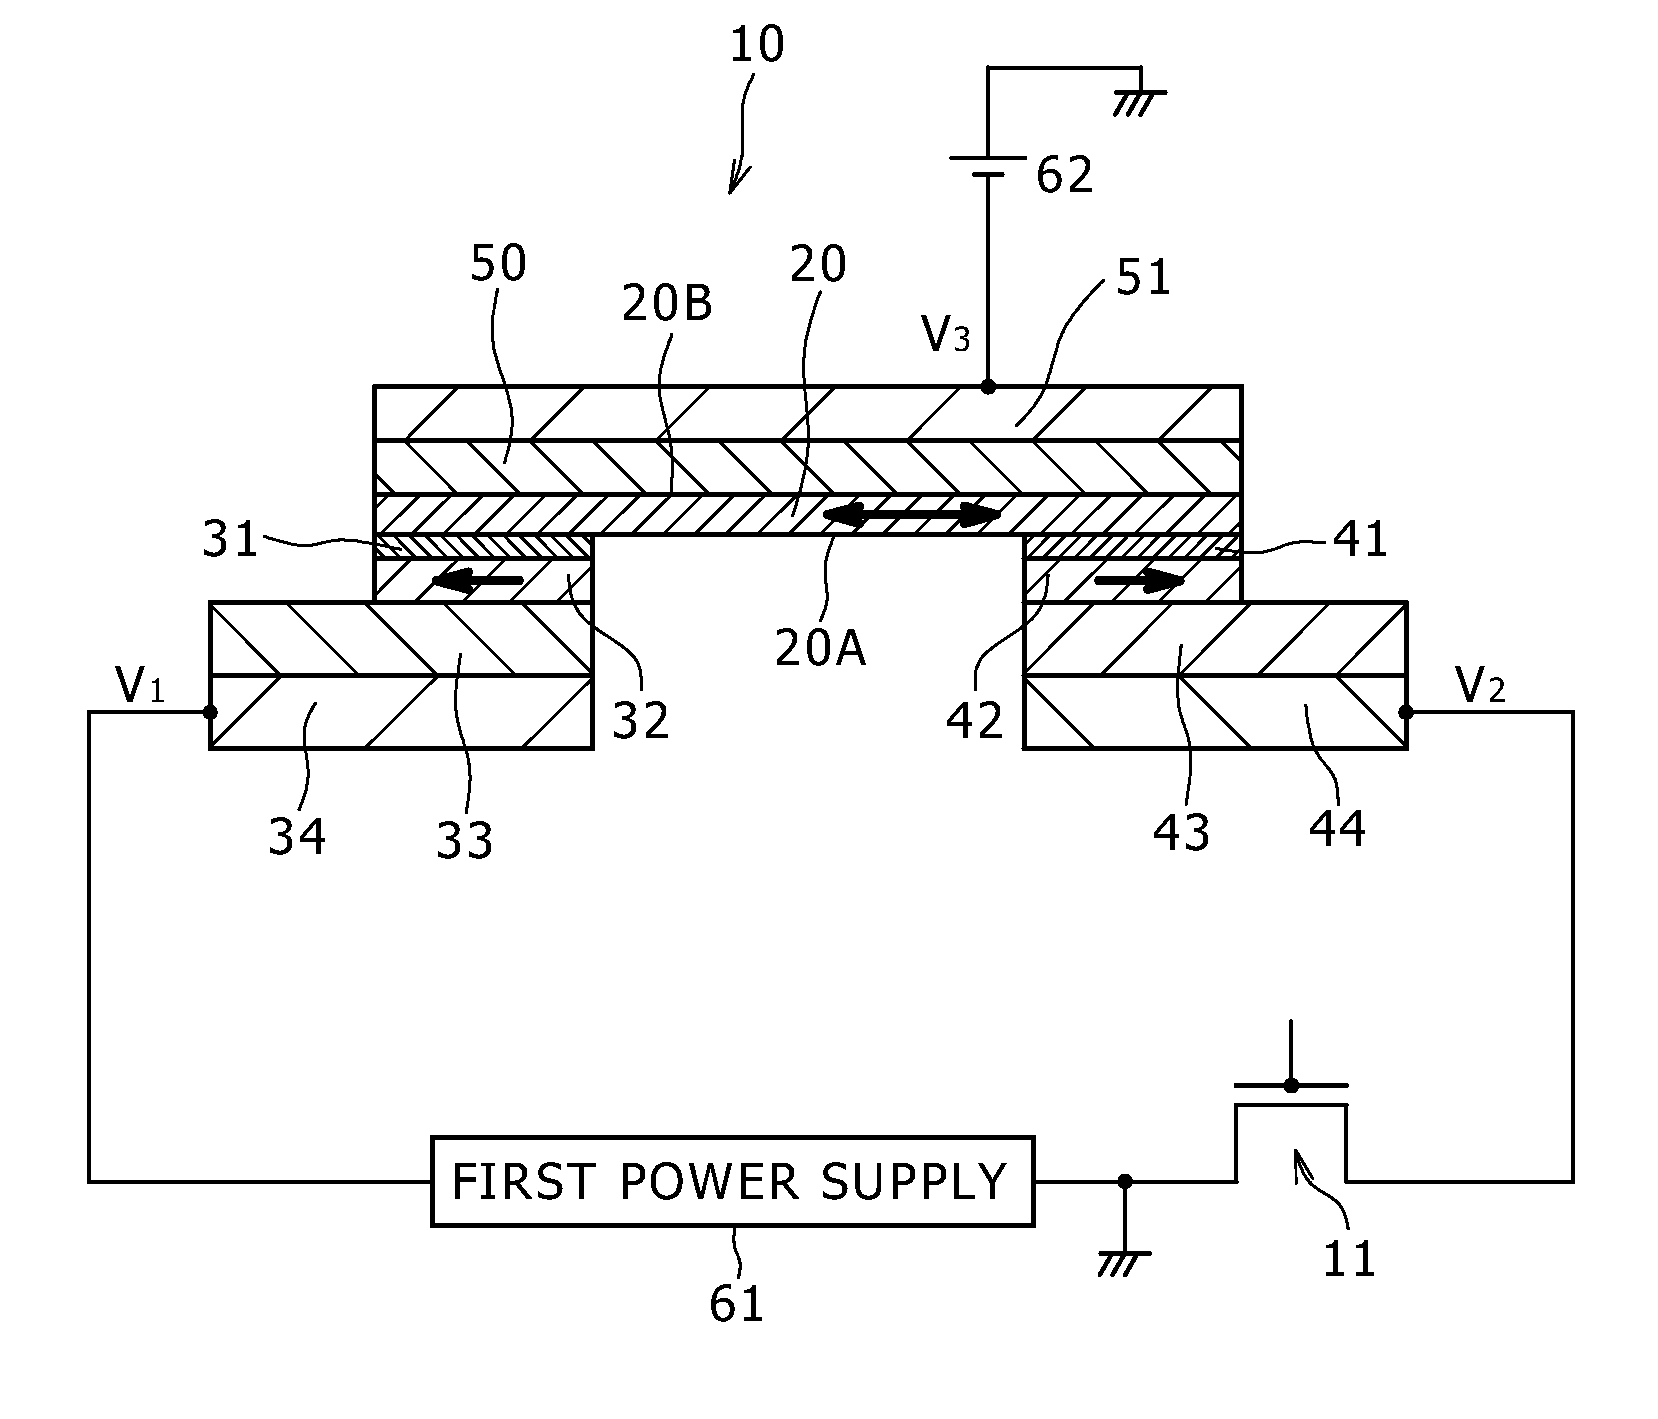 Spin-injection magnetoresistance effect element